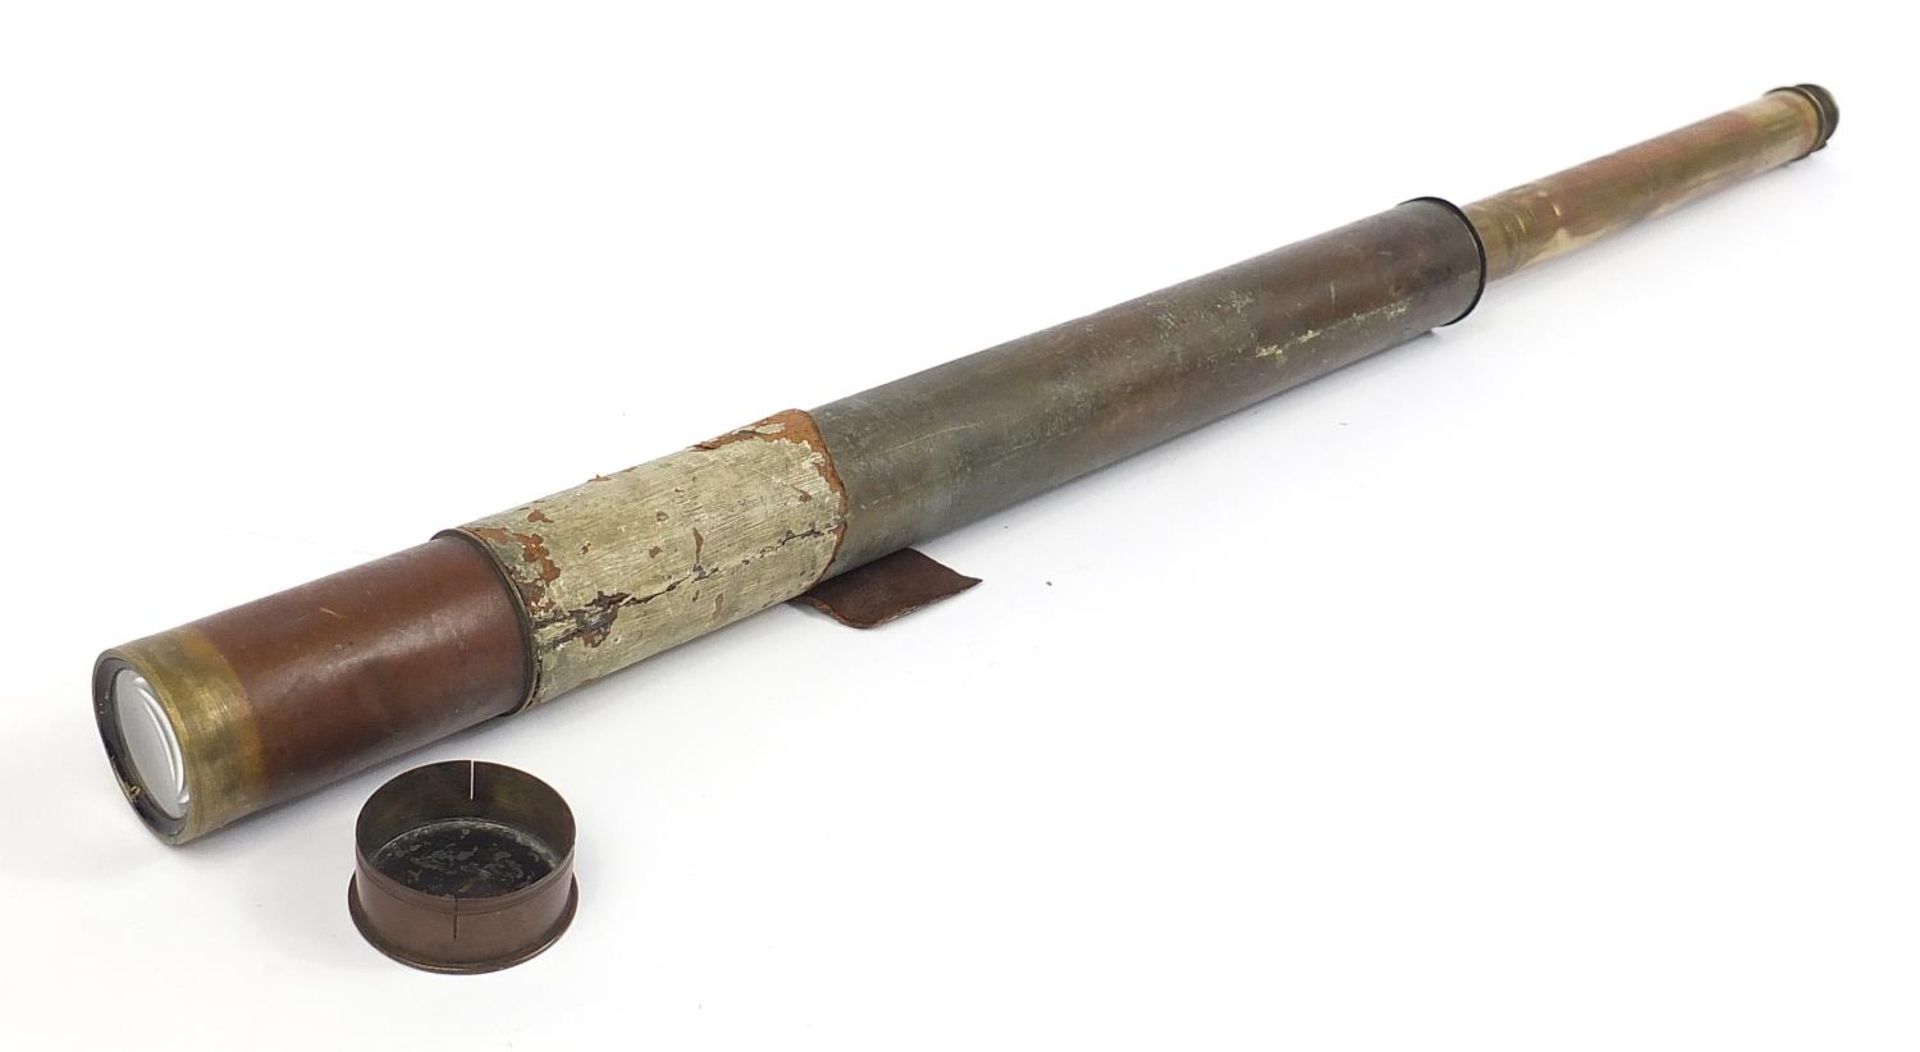 One draw brass naval telescope impressed Trademark Try Me, 53.5cm in length when closed